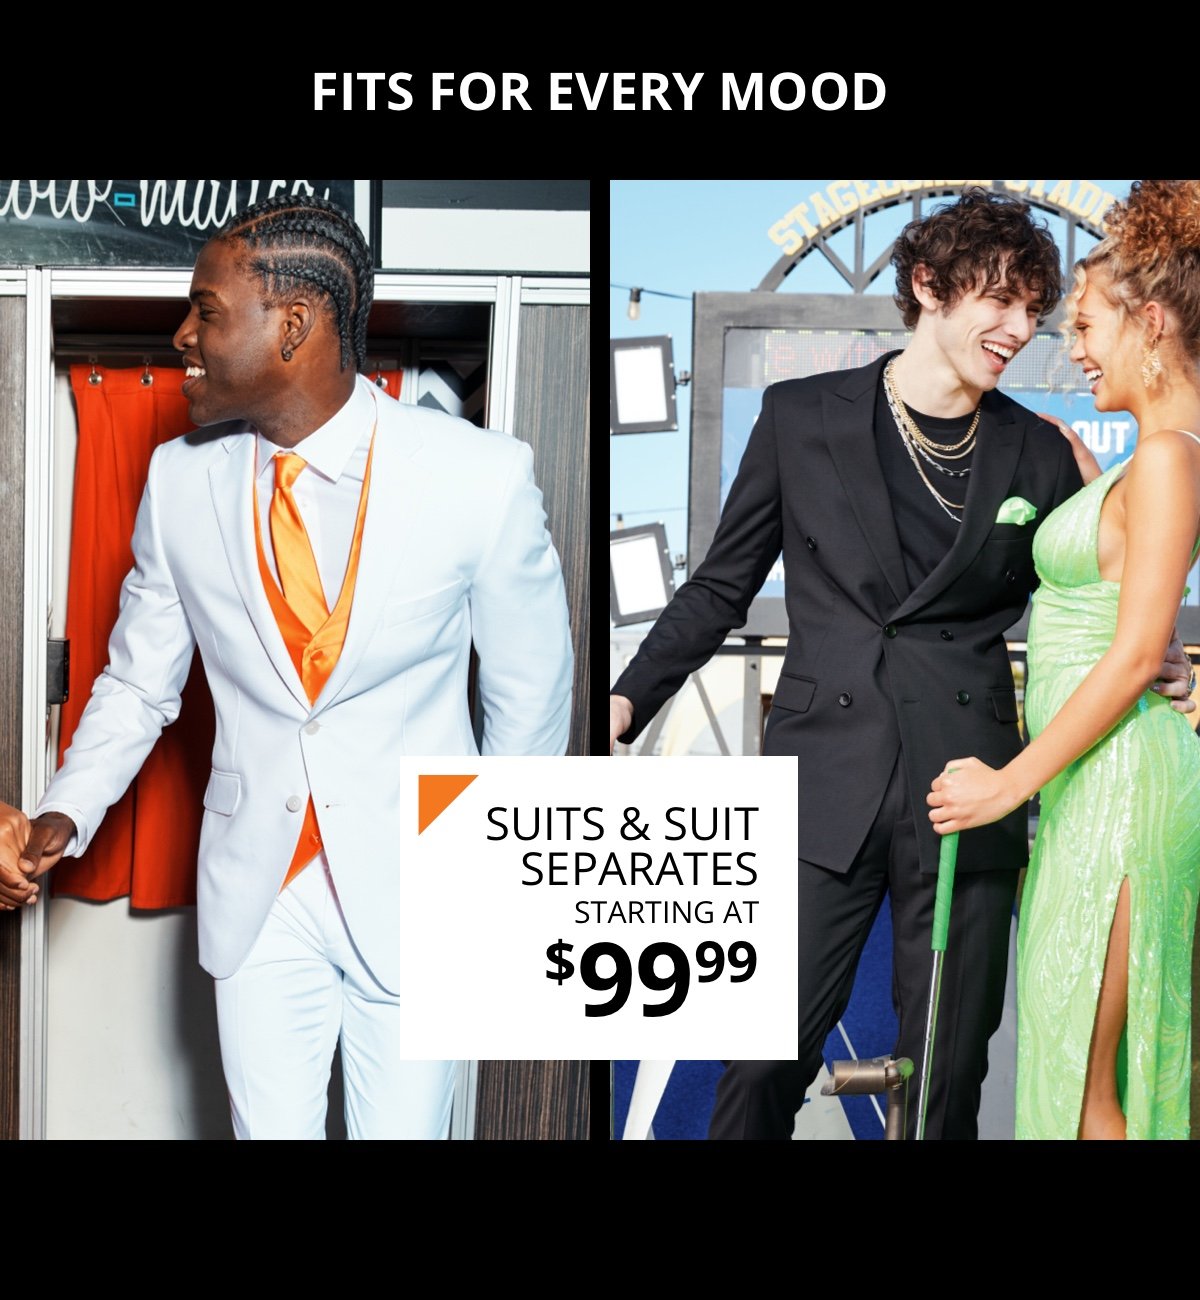 Fits for Every Mood|Suits and Suit Separates|Starting at \\$99.99